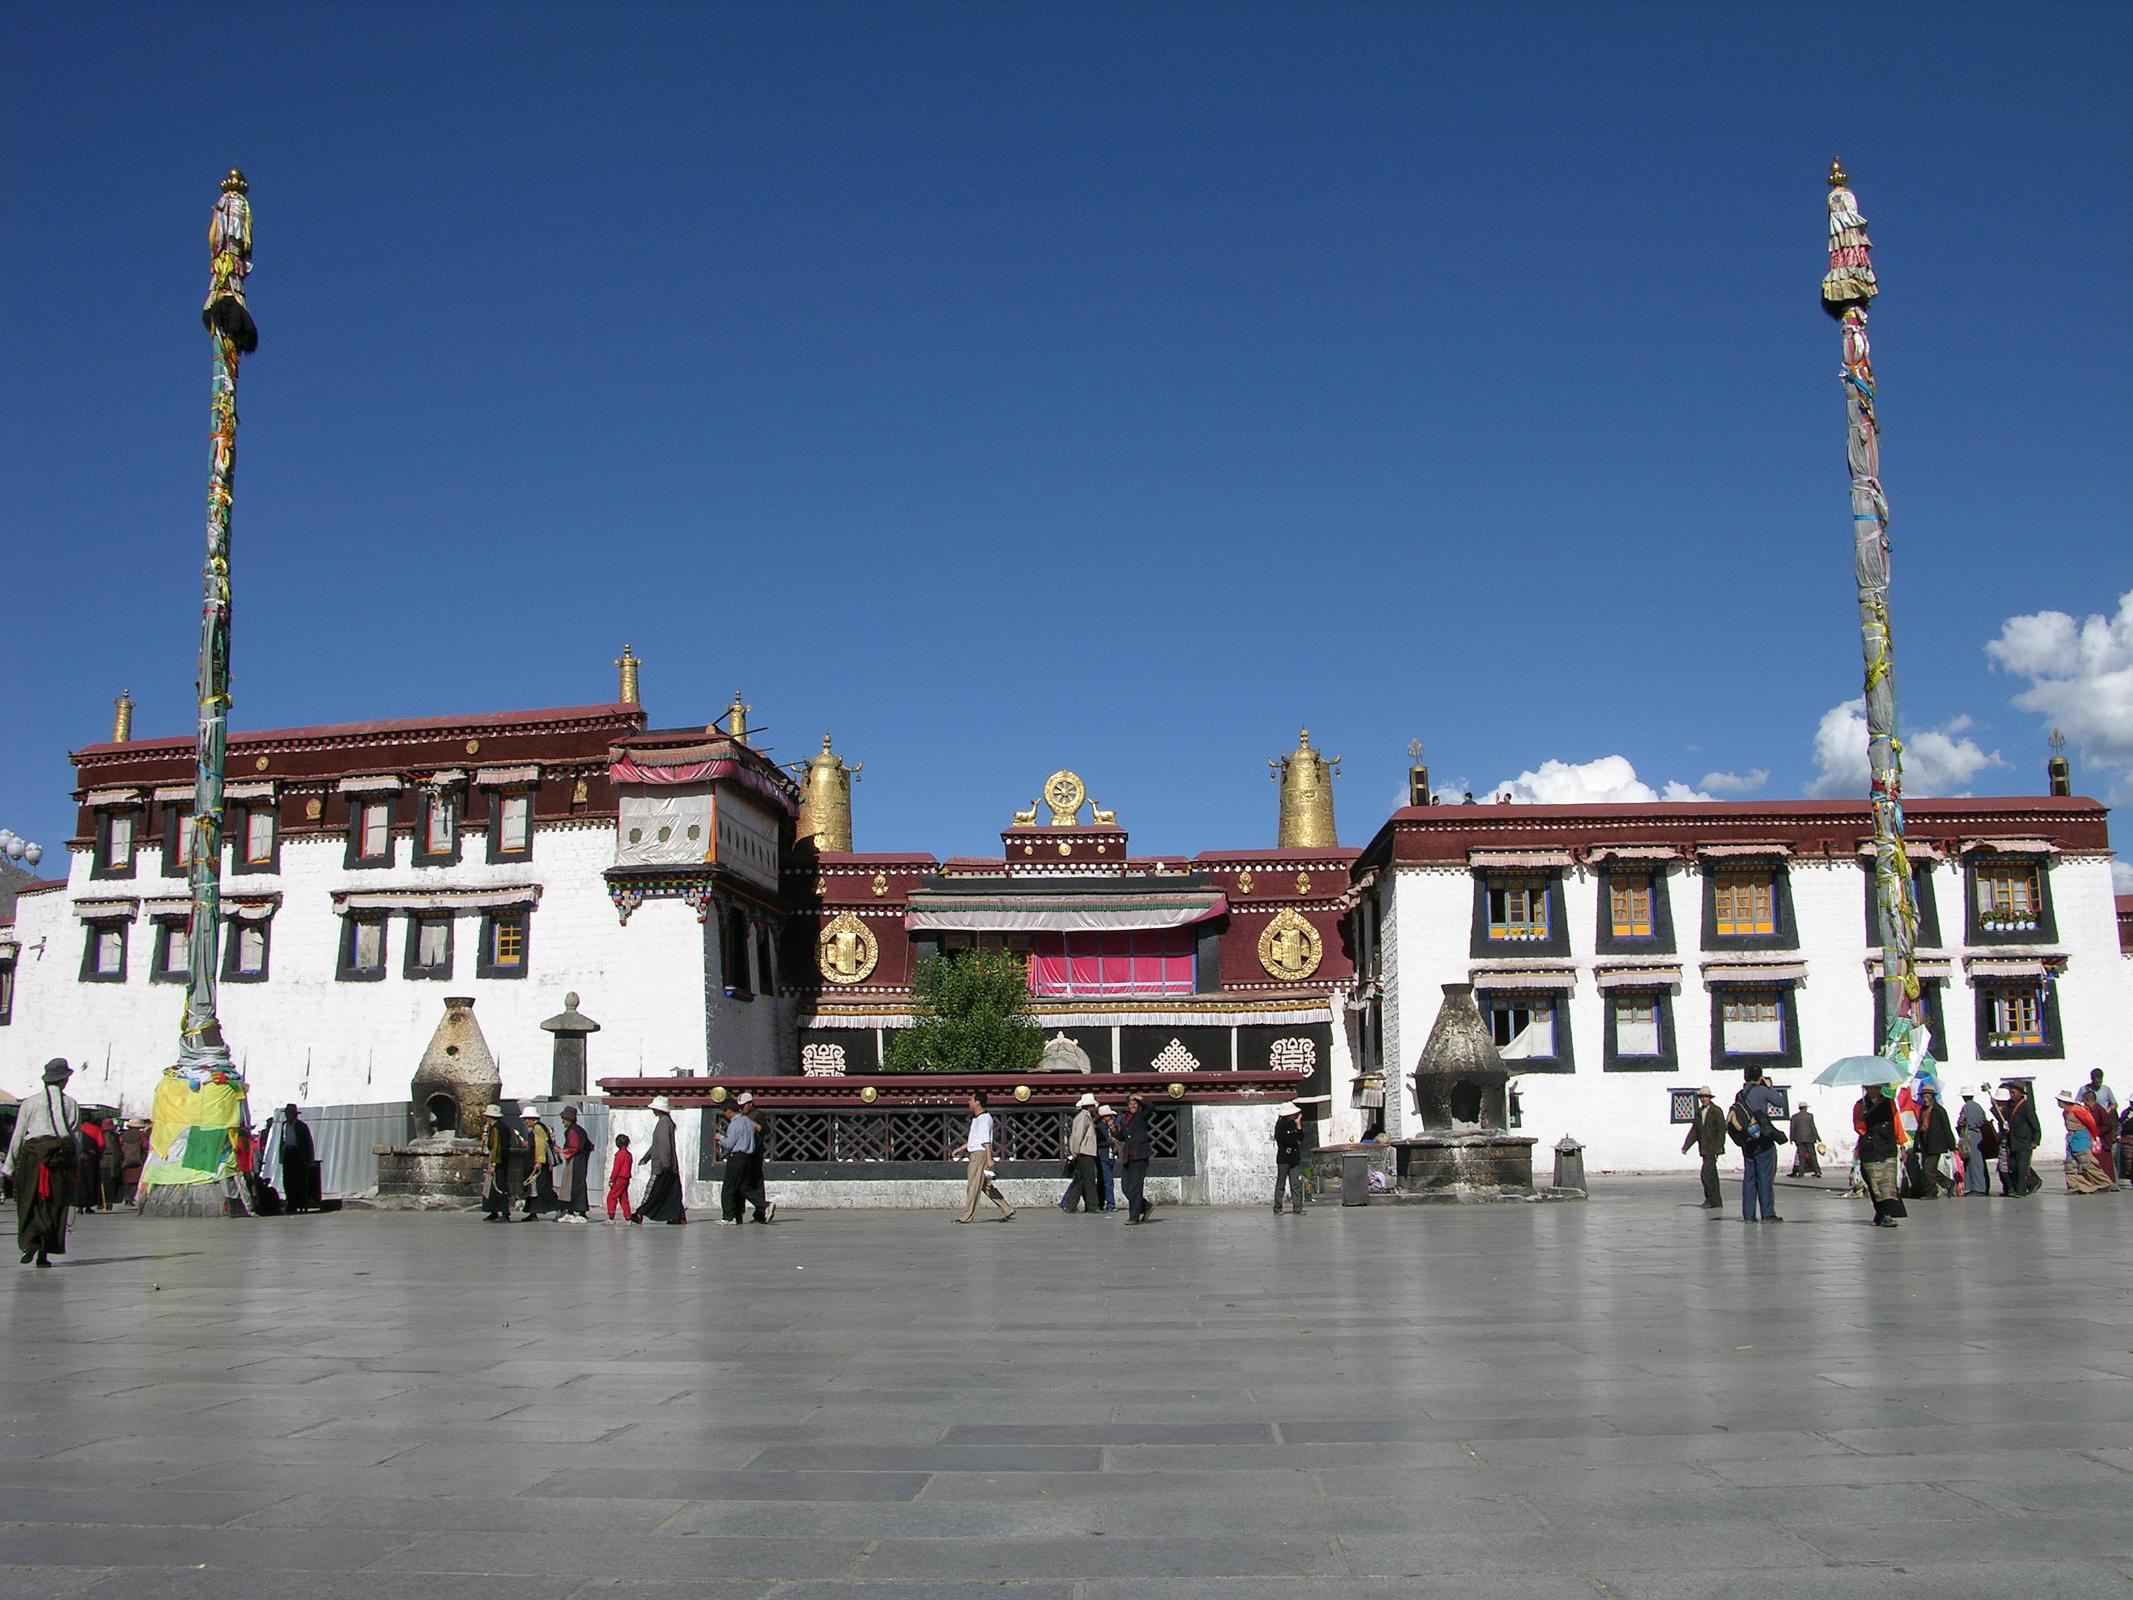 Tibet Lhasa 02 04 Jokhang Outside Full View The Jokhang Temple is the spiritual centre of Tibet and destination of millions of Tibetan pilgrims. The Jokhang (or Jowokhang meaning 'chapel of the Jowo') Temple was founded sometime between 639 and 647 by King Songtsen Gampo. Pilgrims pass the front of the Jokhang Temple as they continue their Barkhor kora.